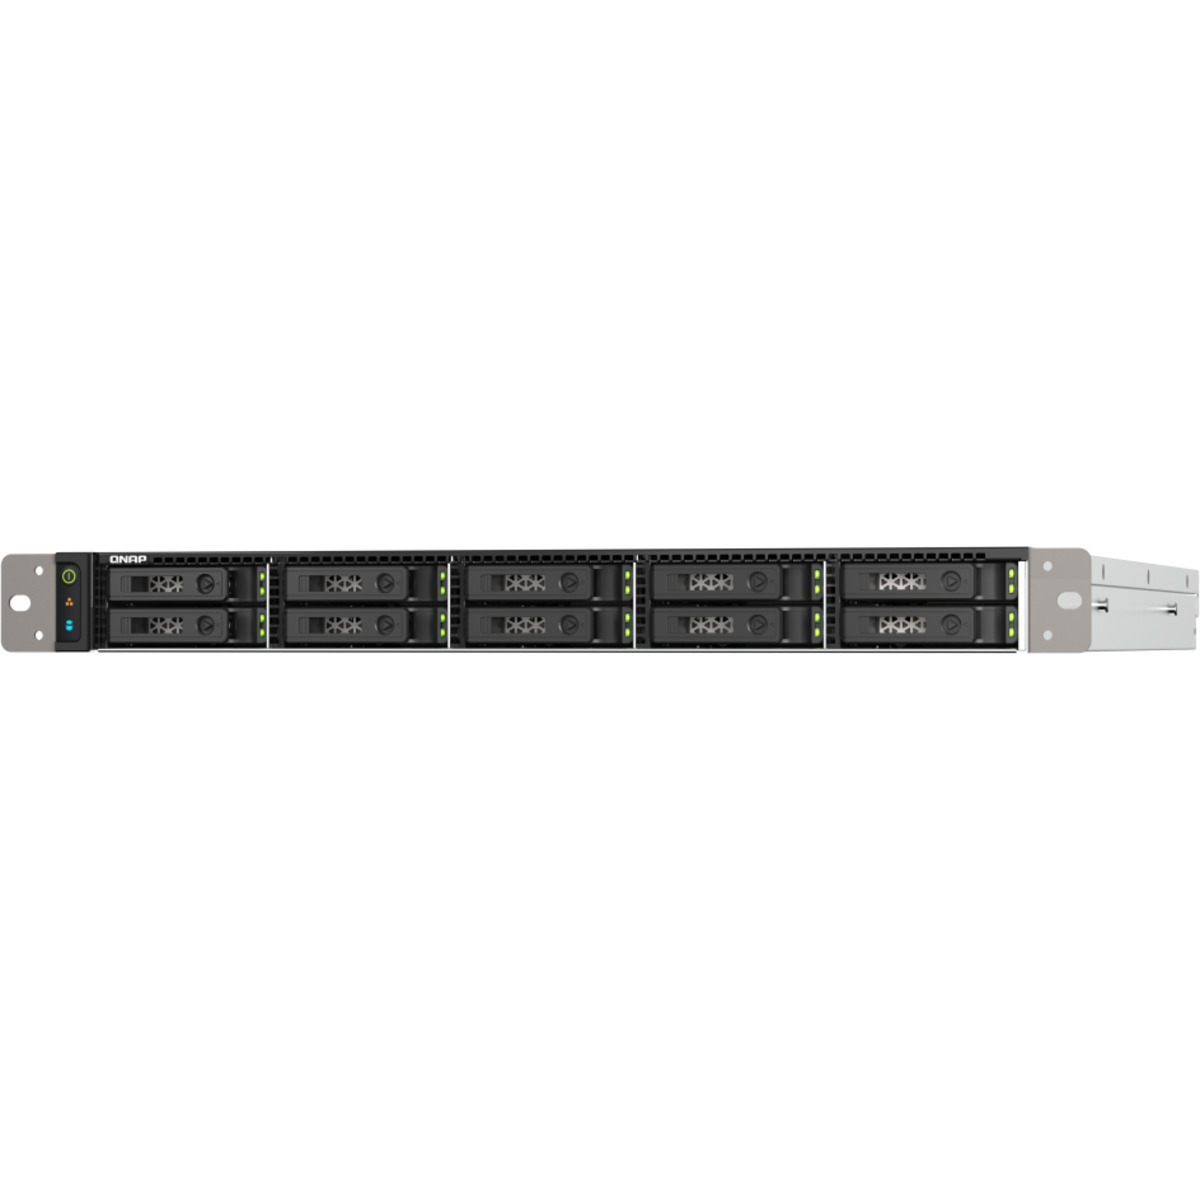 QNAP TS-h1090FU-7302P 3tb 10-Bay RackMount Large Business / Enterprise NAS - Network Attached Storage Device 6x500gb Samsung 970 EVO PLUS MZ-V7S500BW  3500/2300MB/s M.2 2280 NVMe SSD CONSUMER Class Drives Installed - Burn-In Tested TS-h1090FU-7302P